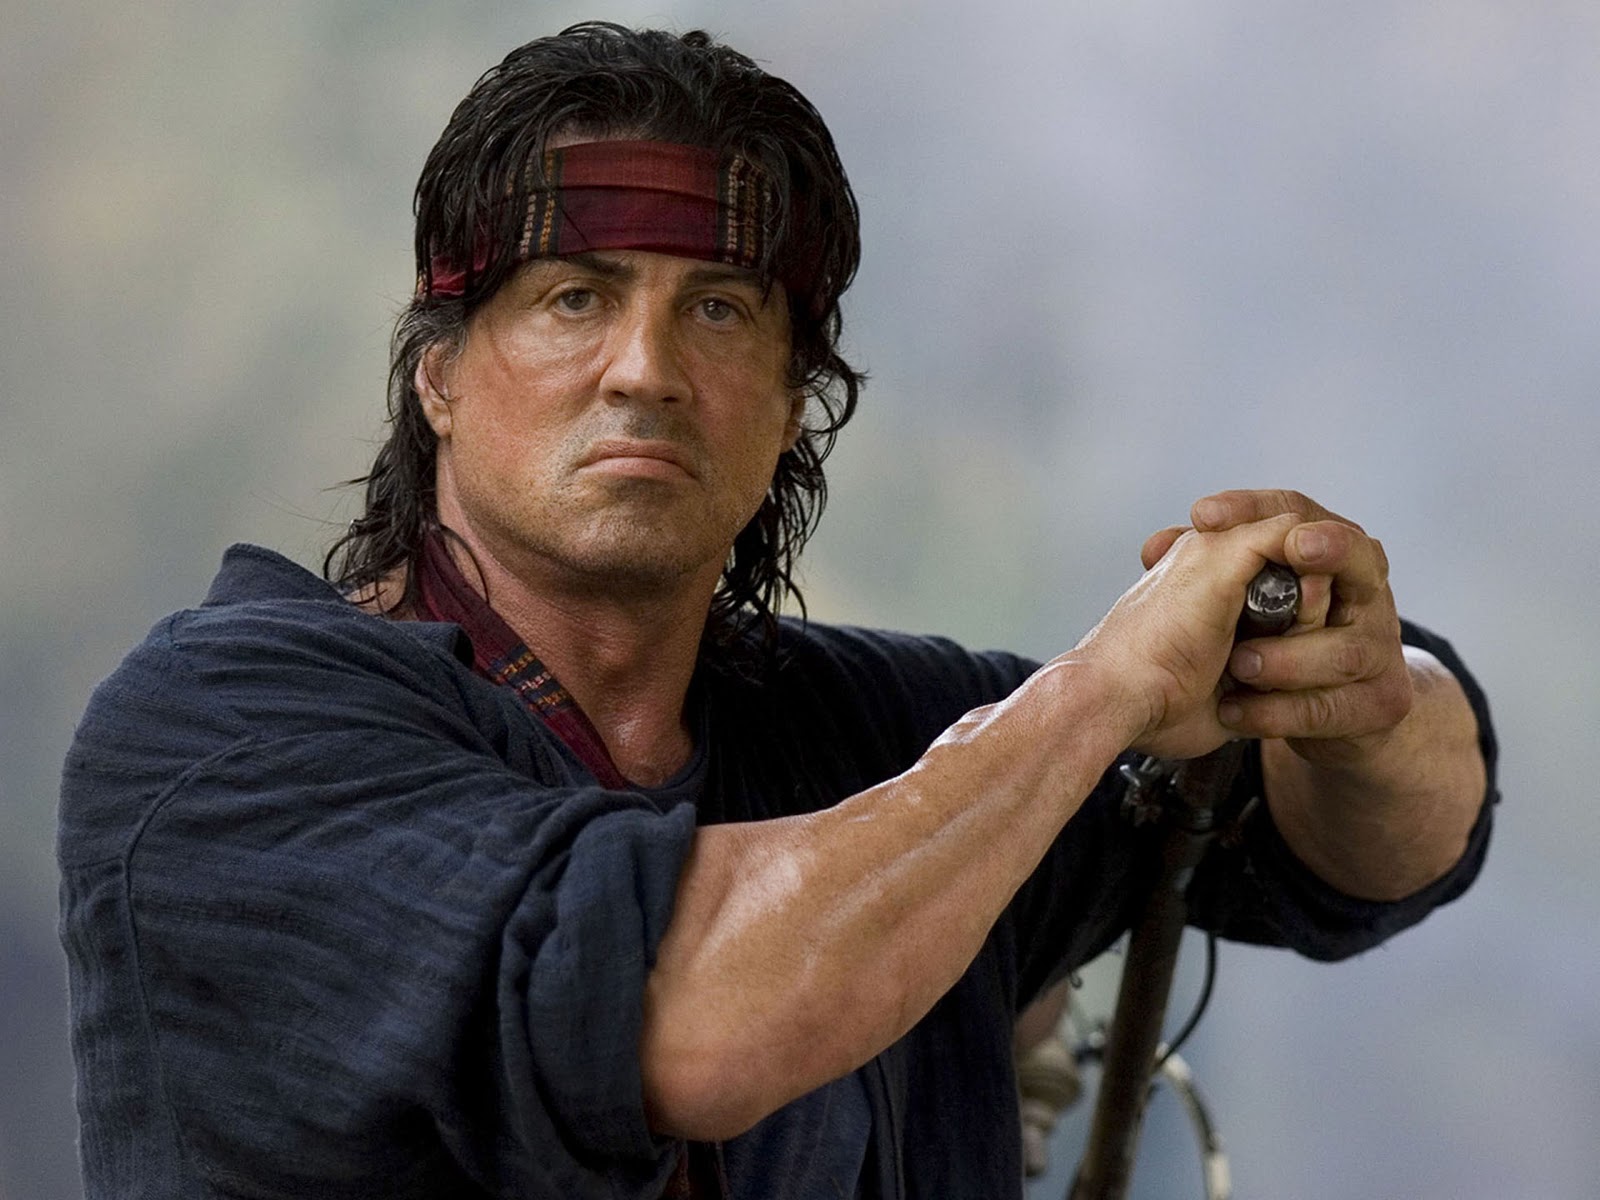 download stallone and bullock movie